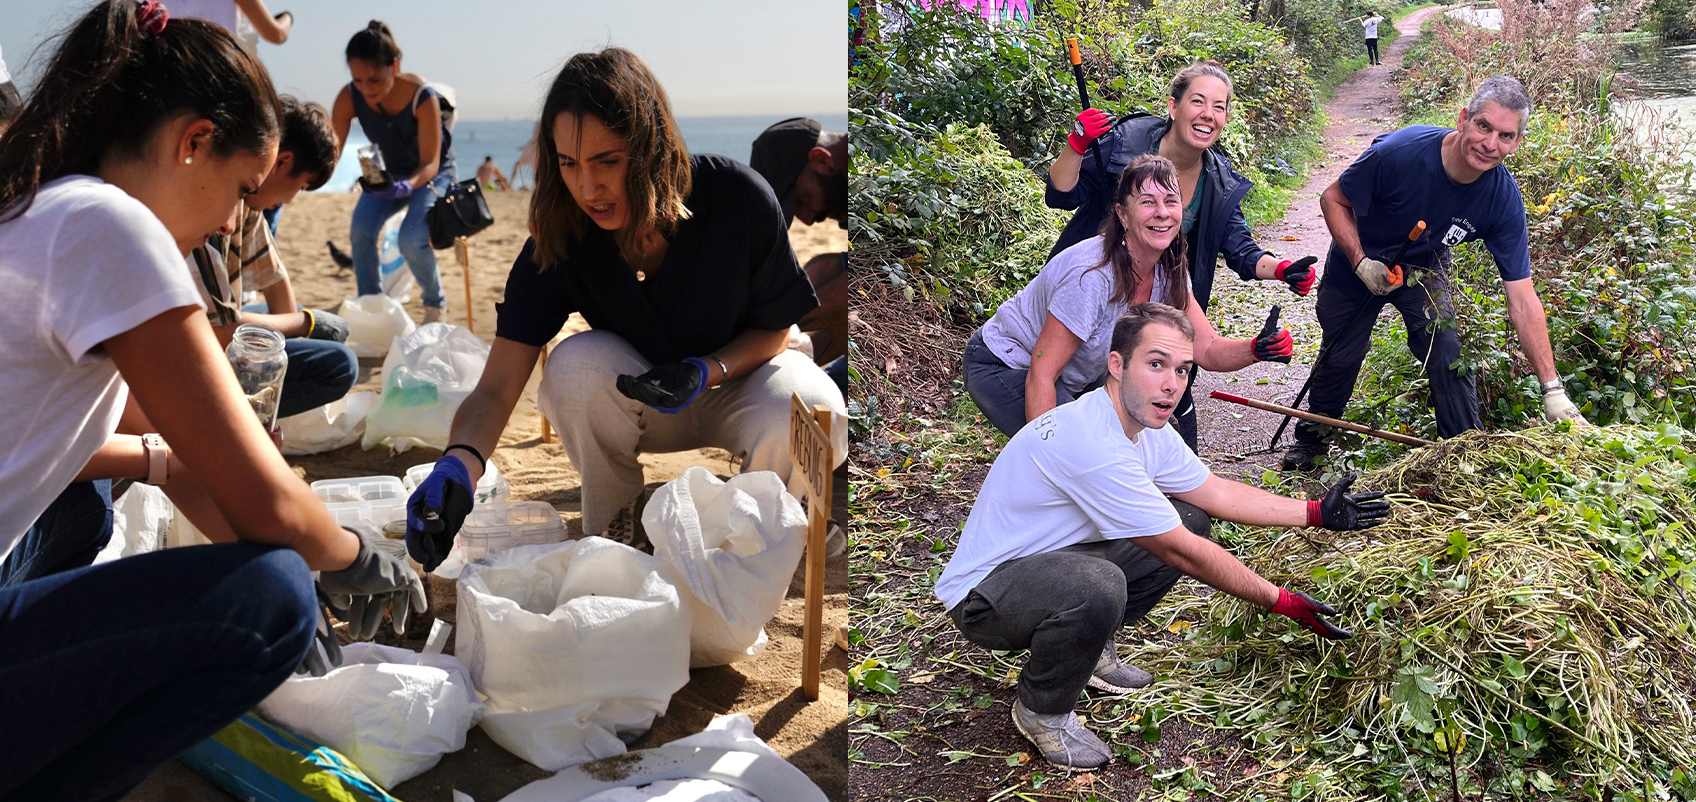 "(Left) Employees sorting trash at the beach
(Right) Employees removing weeds and trash from the canal"